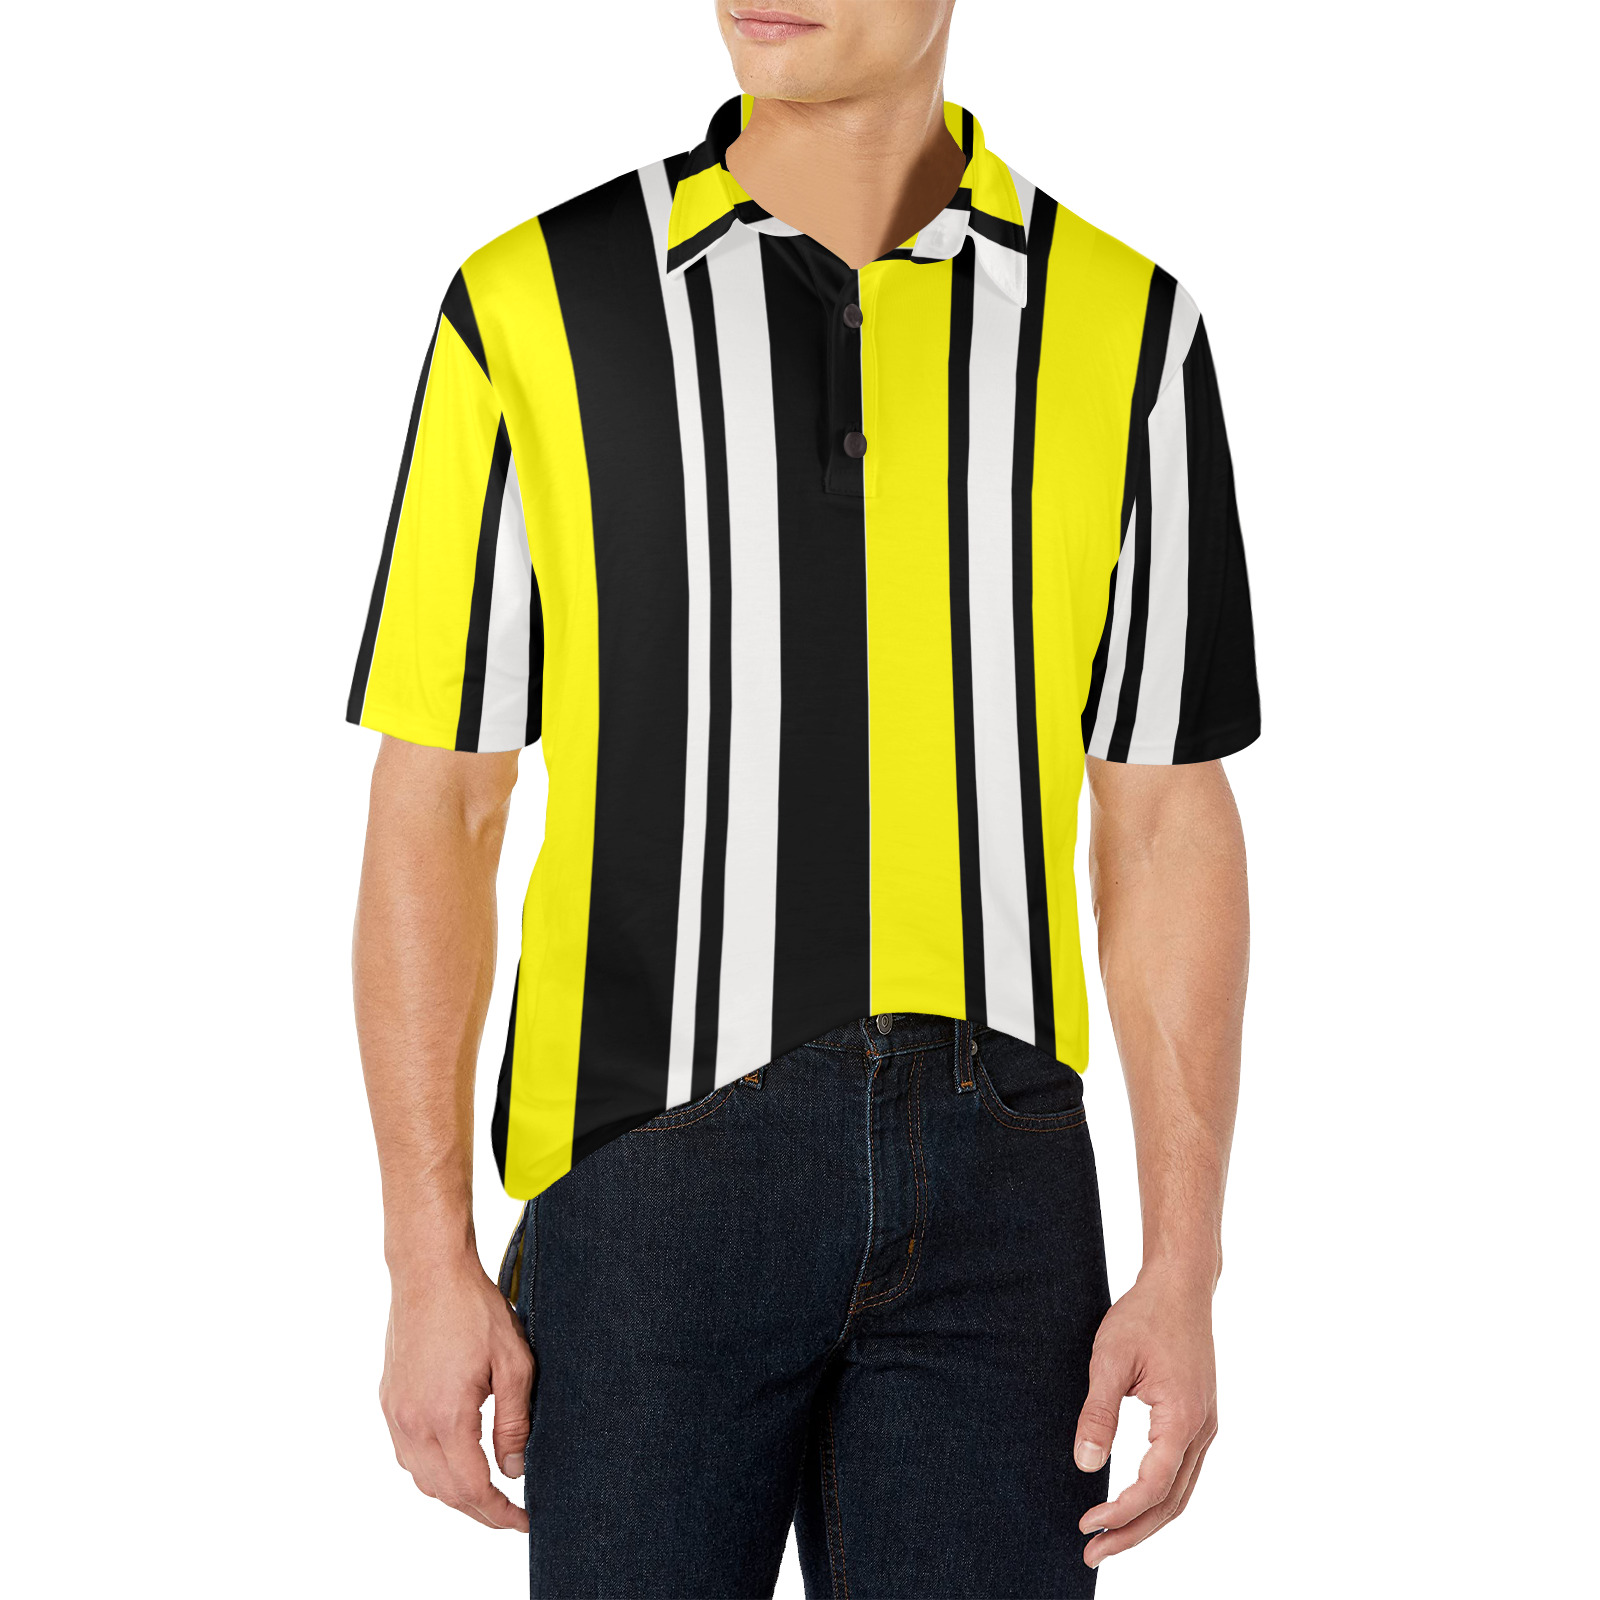 by stripes Men's All Over Print Polo Shirt (Model T55)